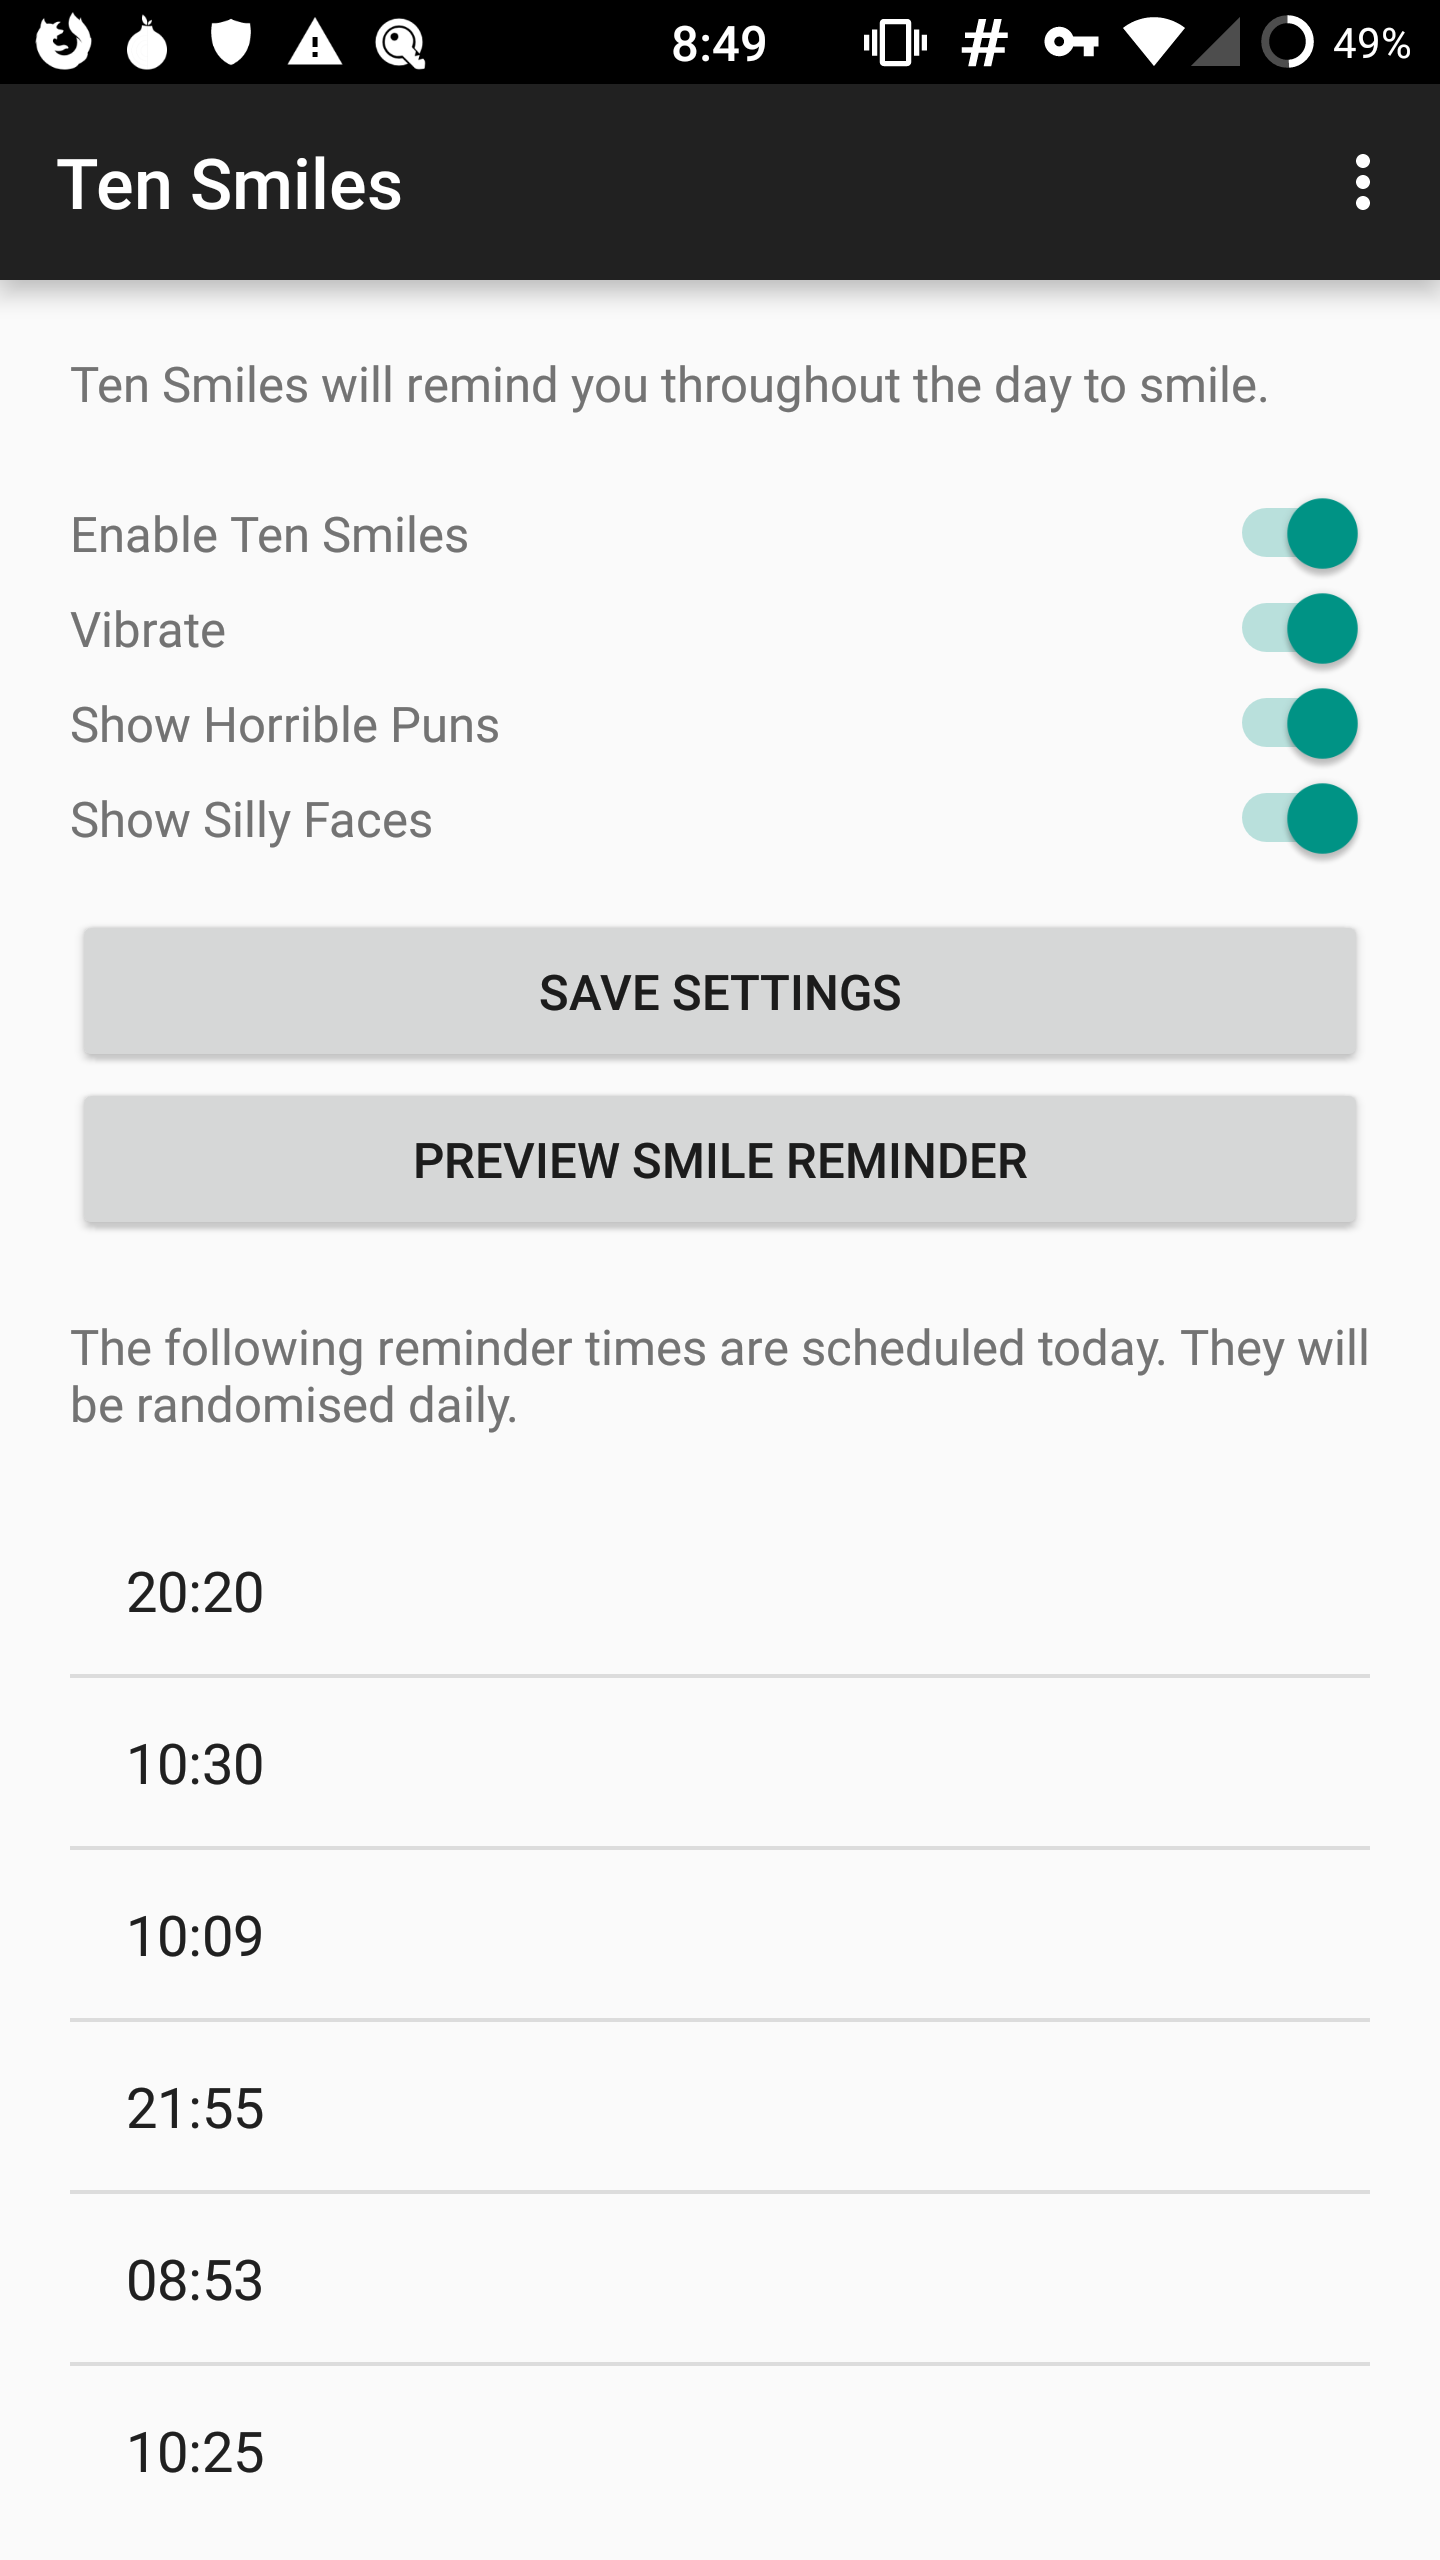 A small number of settings visible in the Ten Smiles app